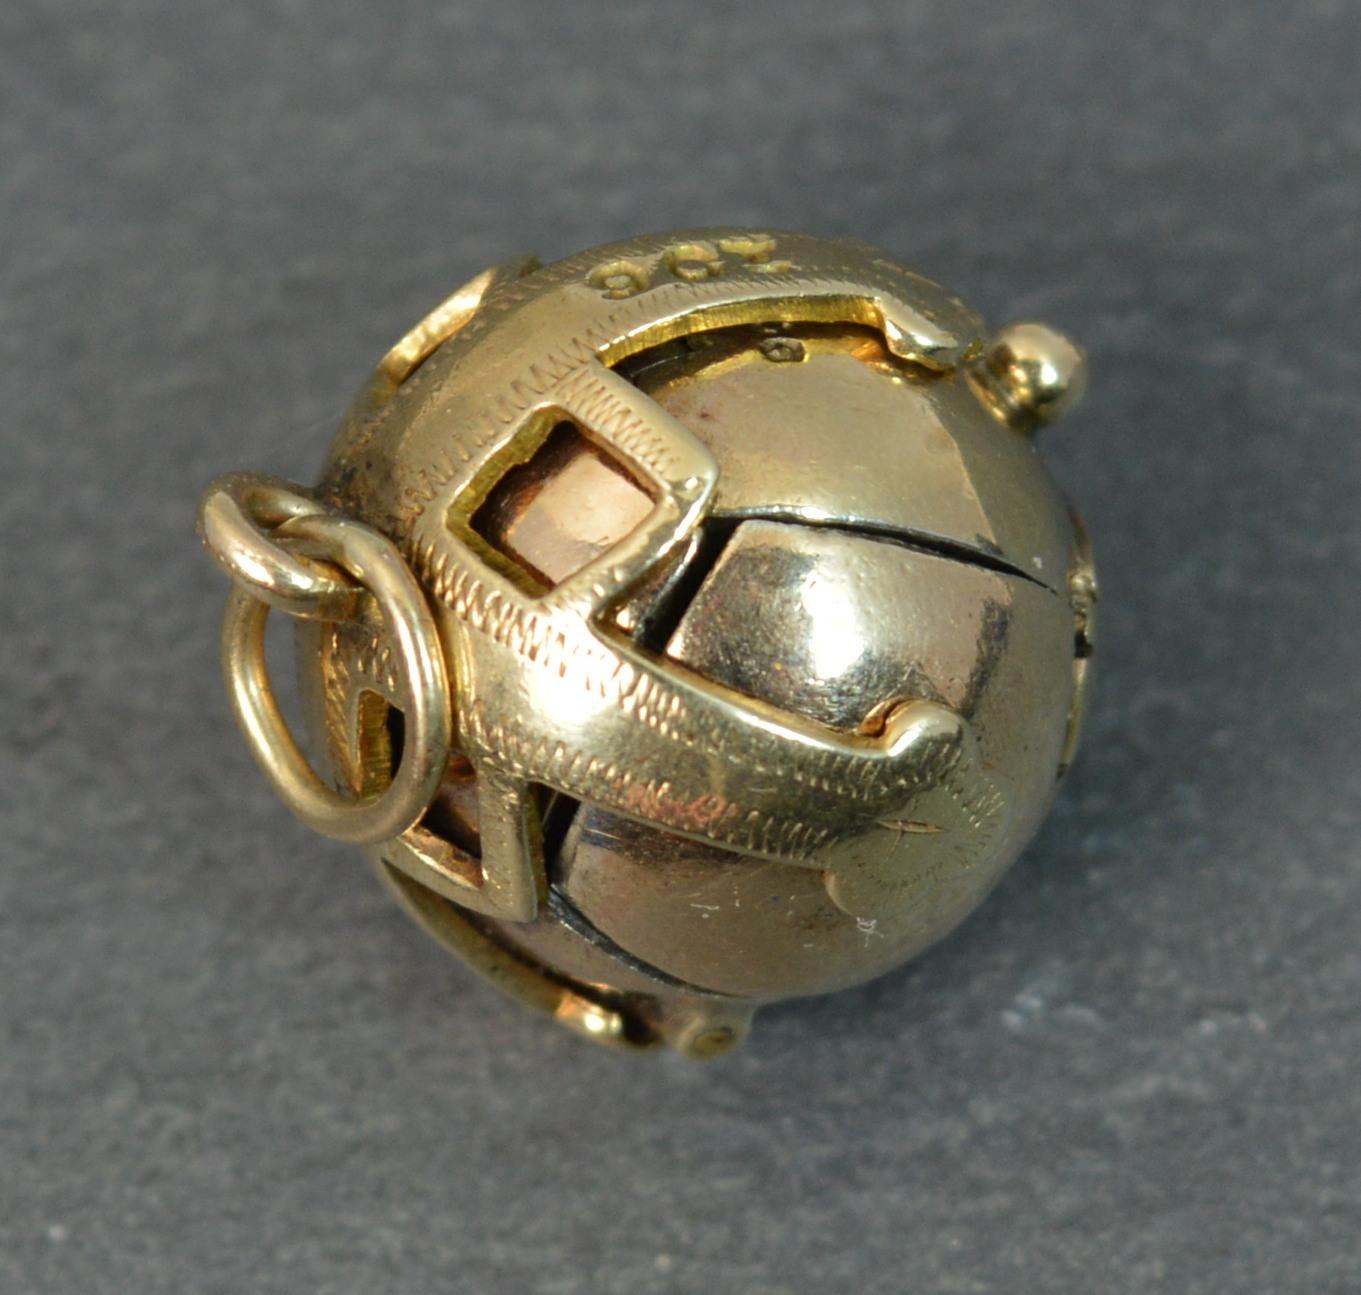 Women's or Men's Masons Masonic 9 Carat Gold and Silver Ball Fob or Pendant